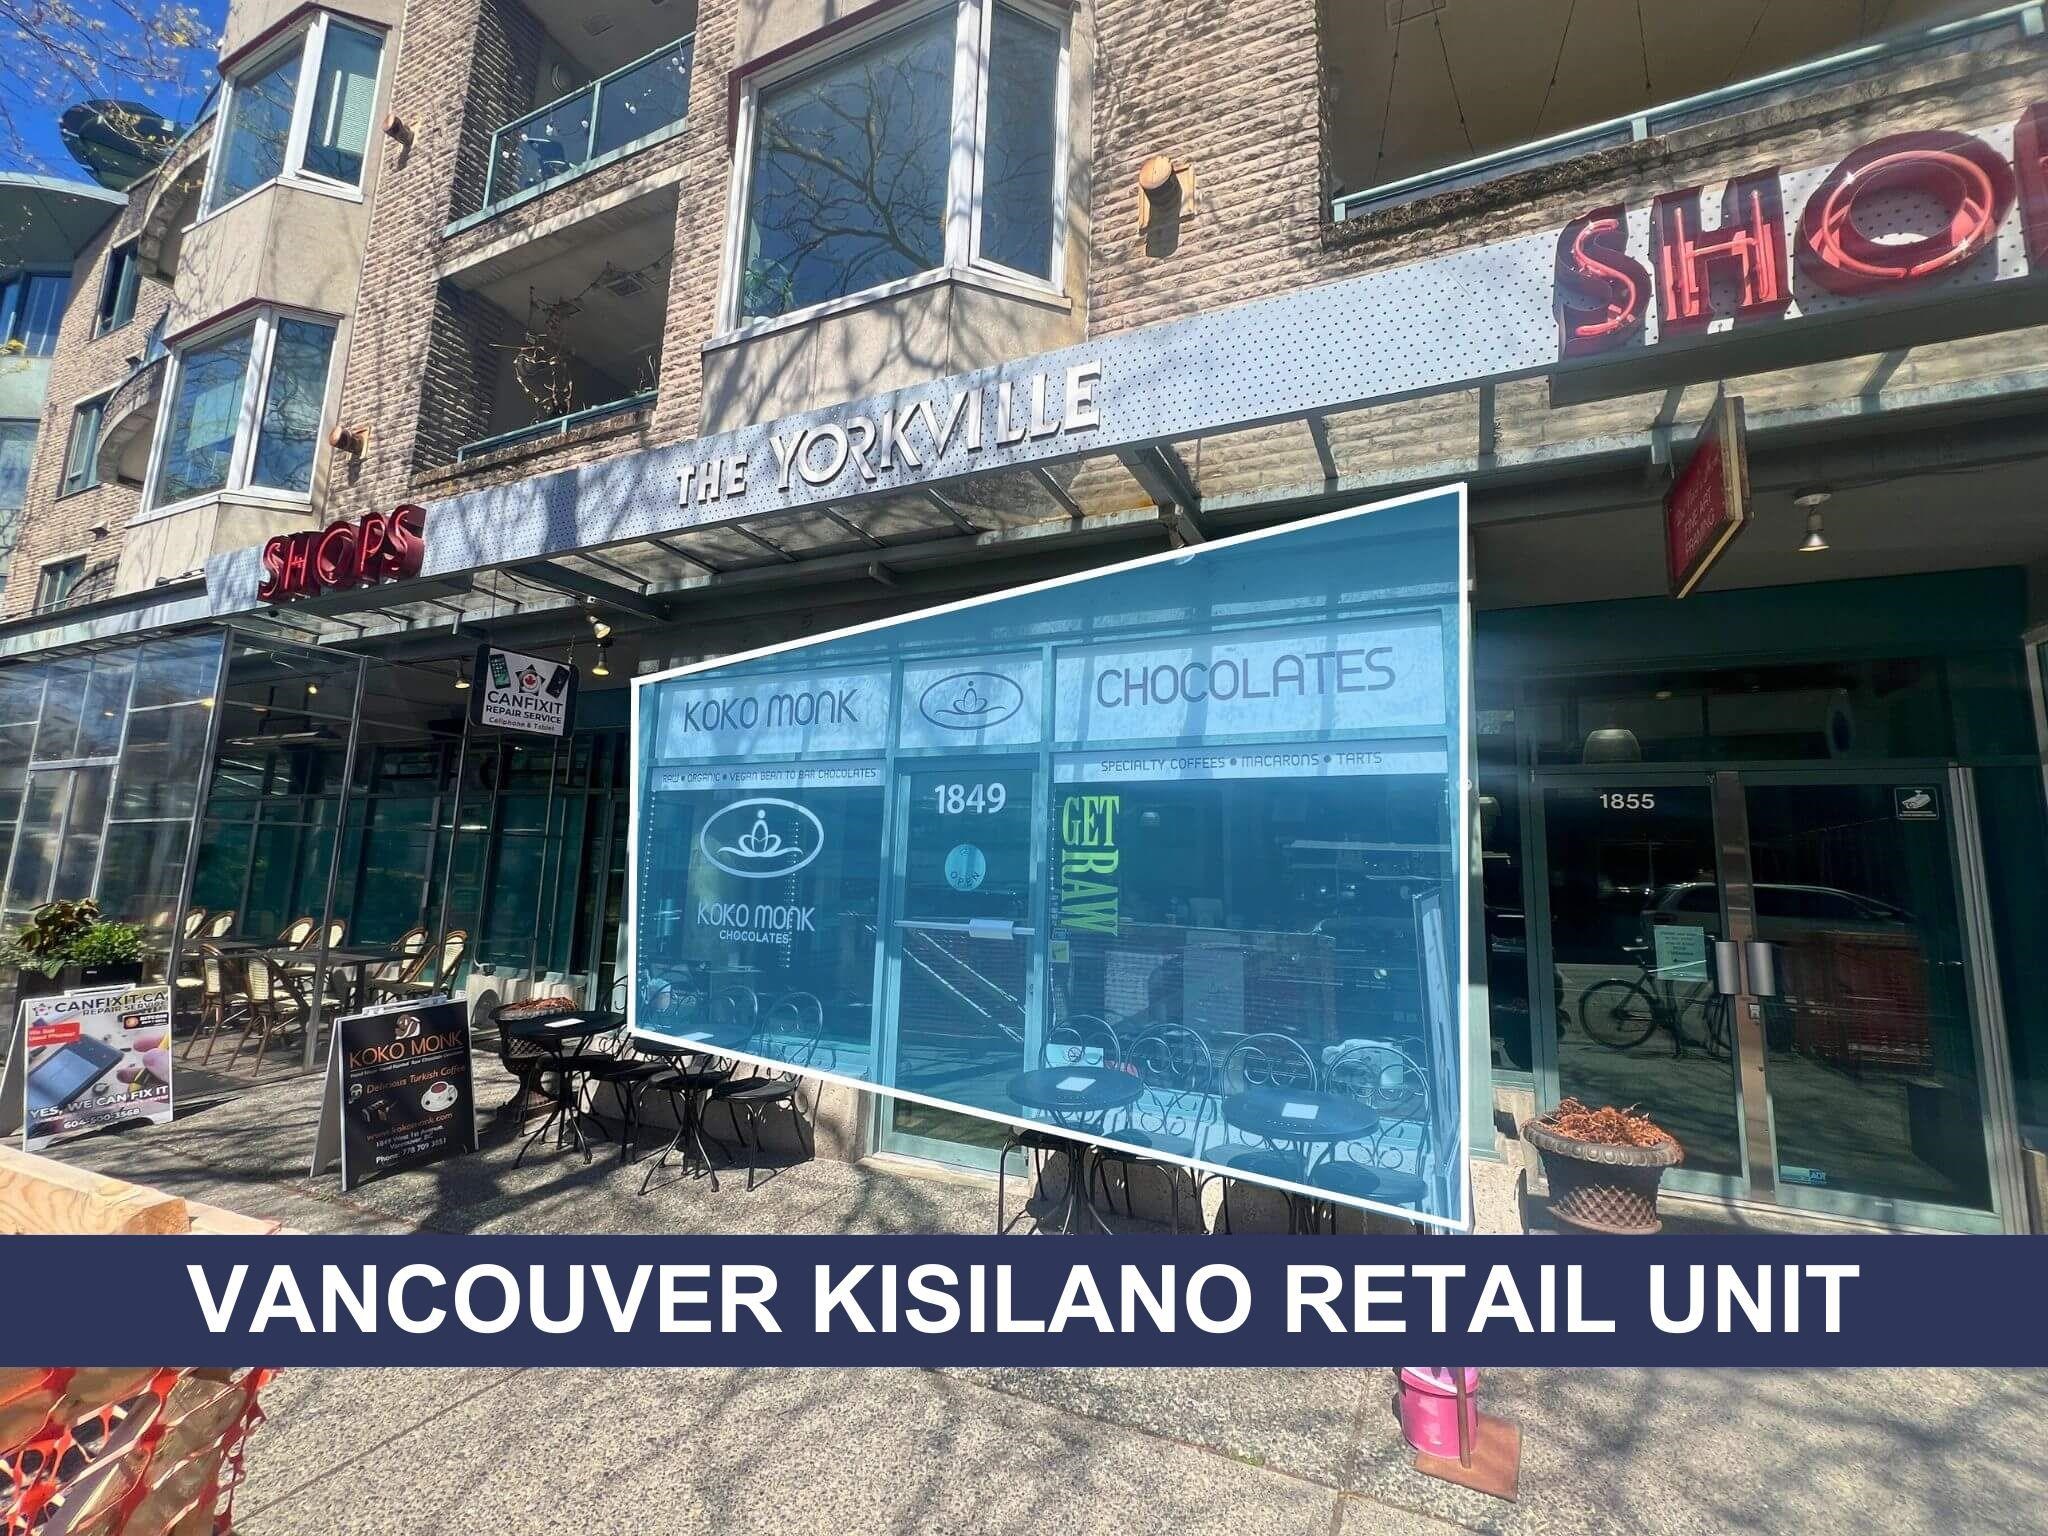 Kitsilano Land Commercial for sale:    (Listed 6800-05-09)